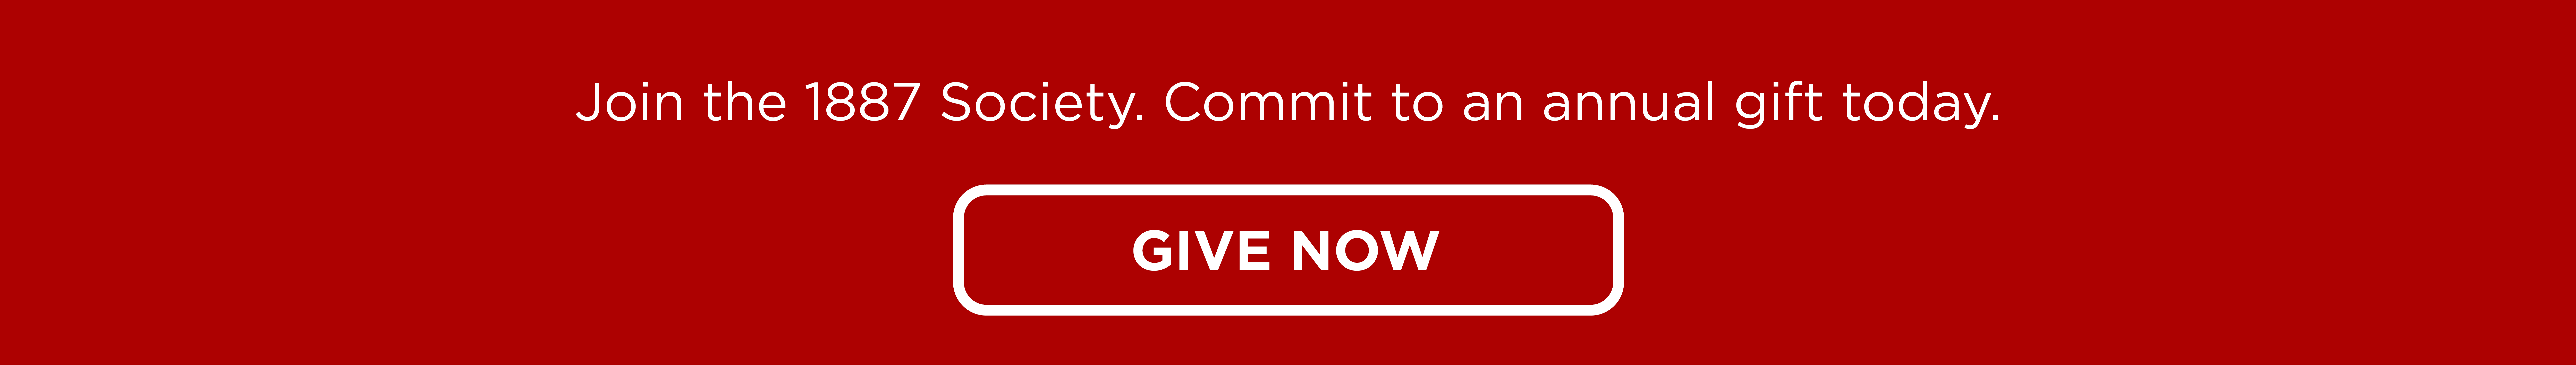 Join the 1887 Society. Commit to an annual gift today. 